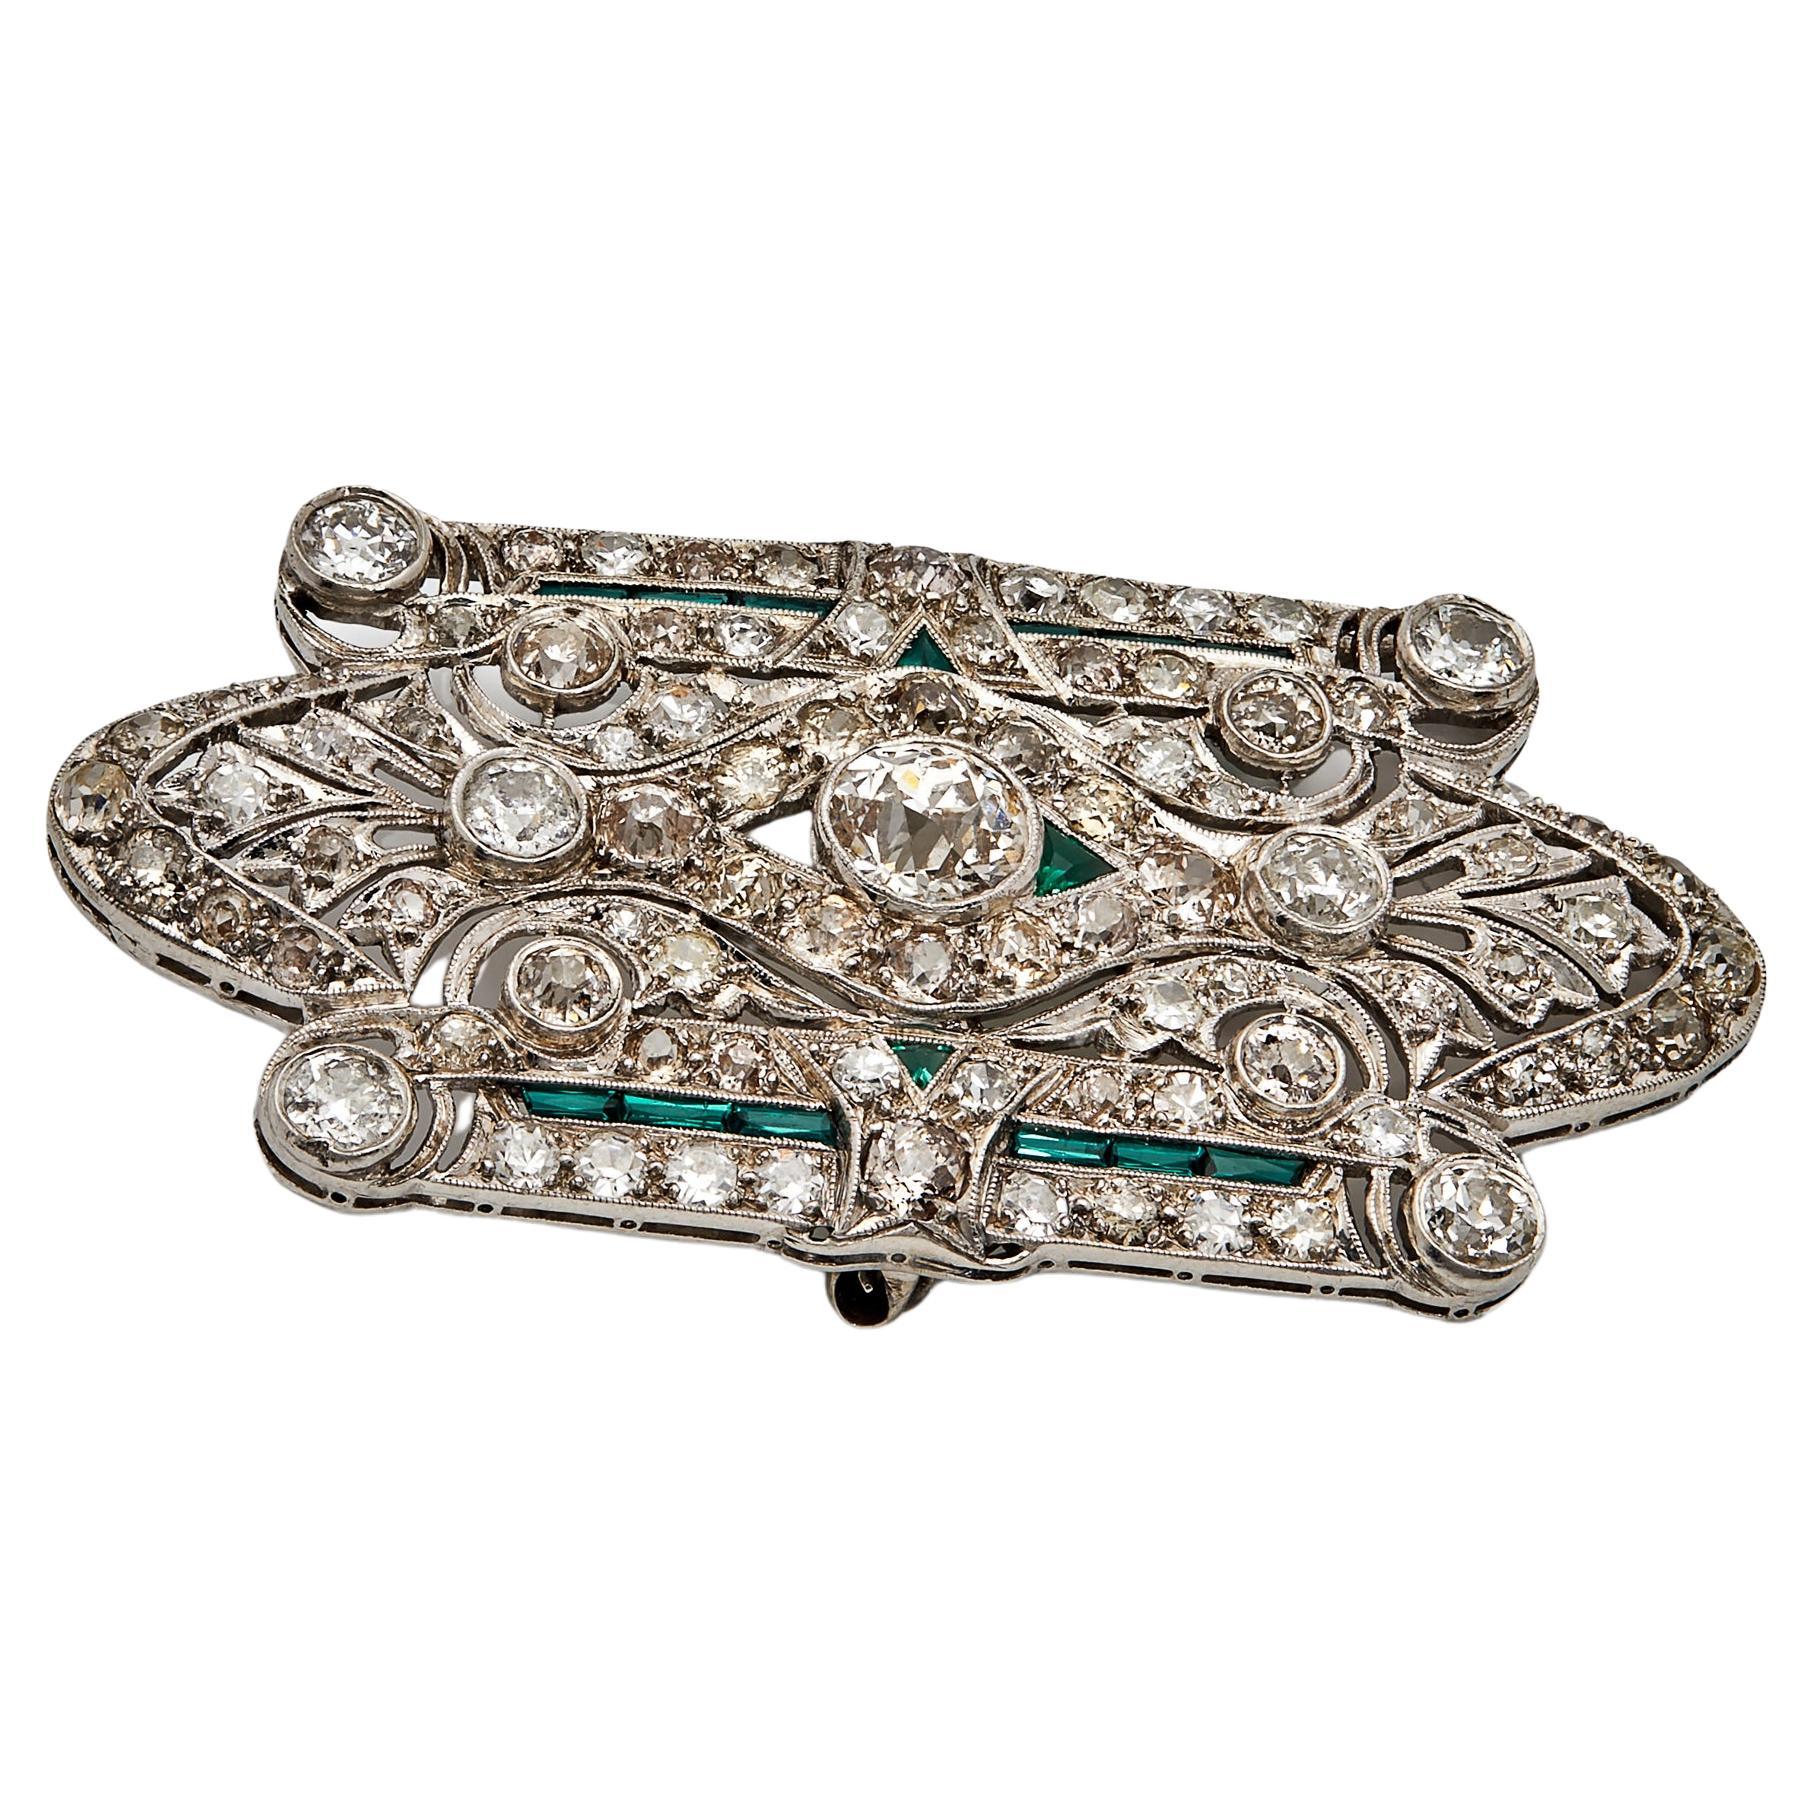  Antique Grand Occasion Brooch For Sale